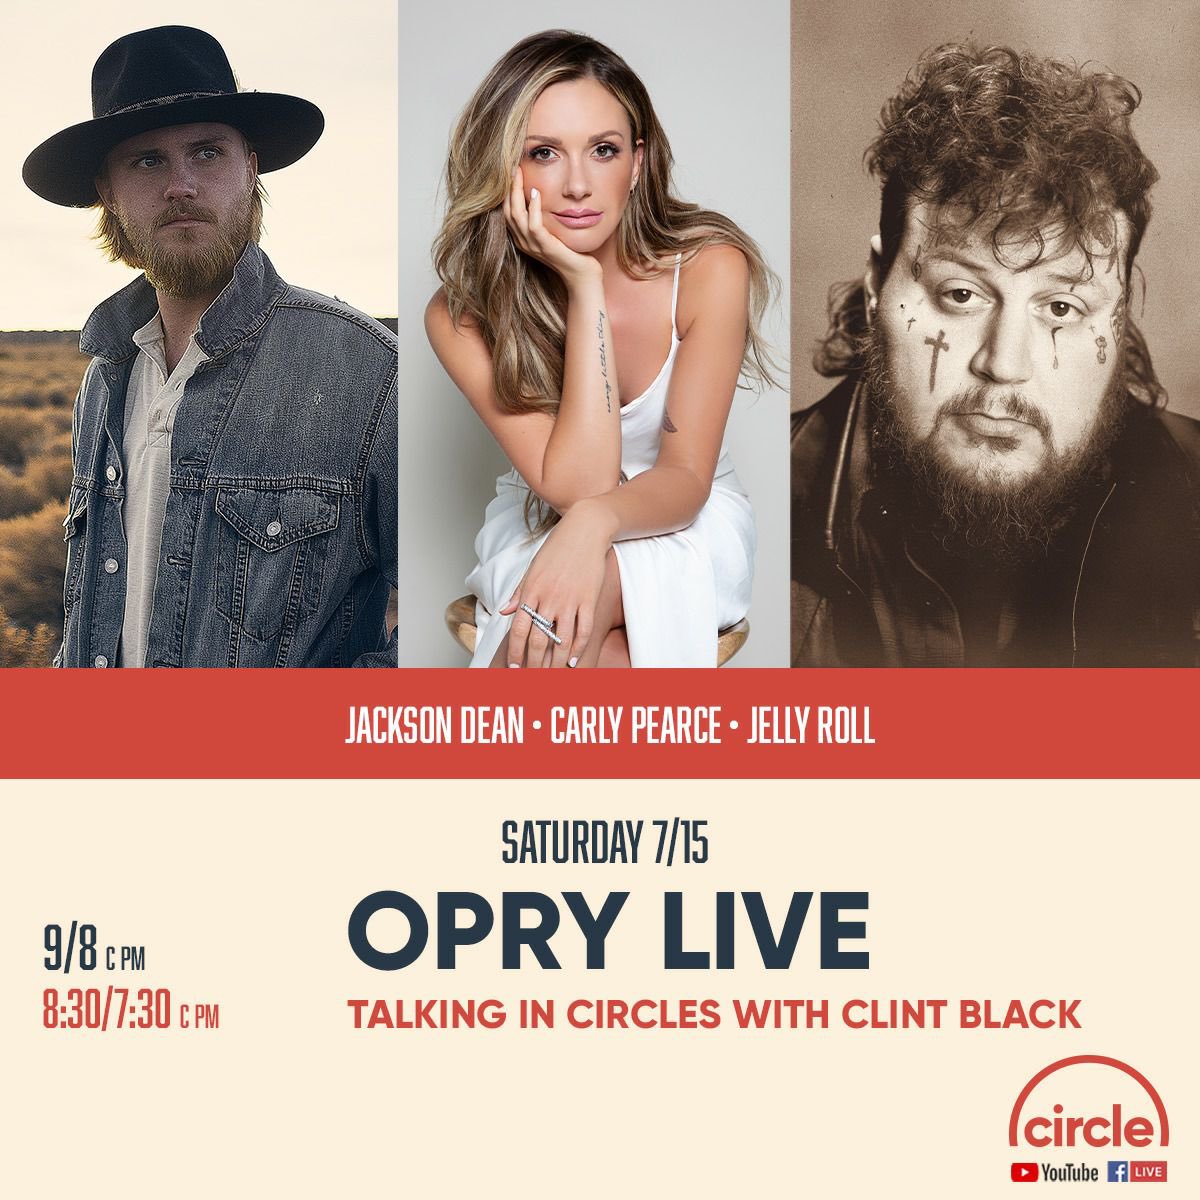 Join @JellyRoll615, @carlypearce and me for a special @opry Live this Saturday at 9/8pm CT. Watch it live on my Facebook page. #OpryLive #CircleAllAccess @CircleAllAccess